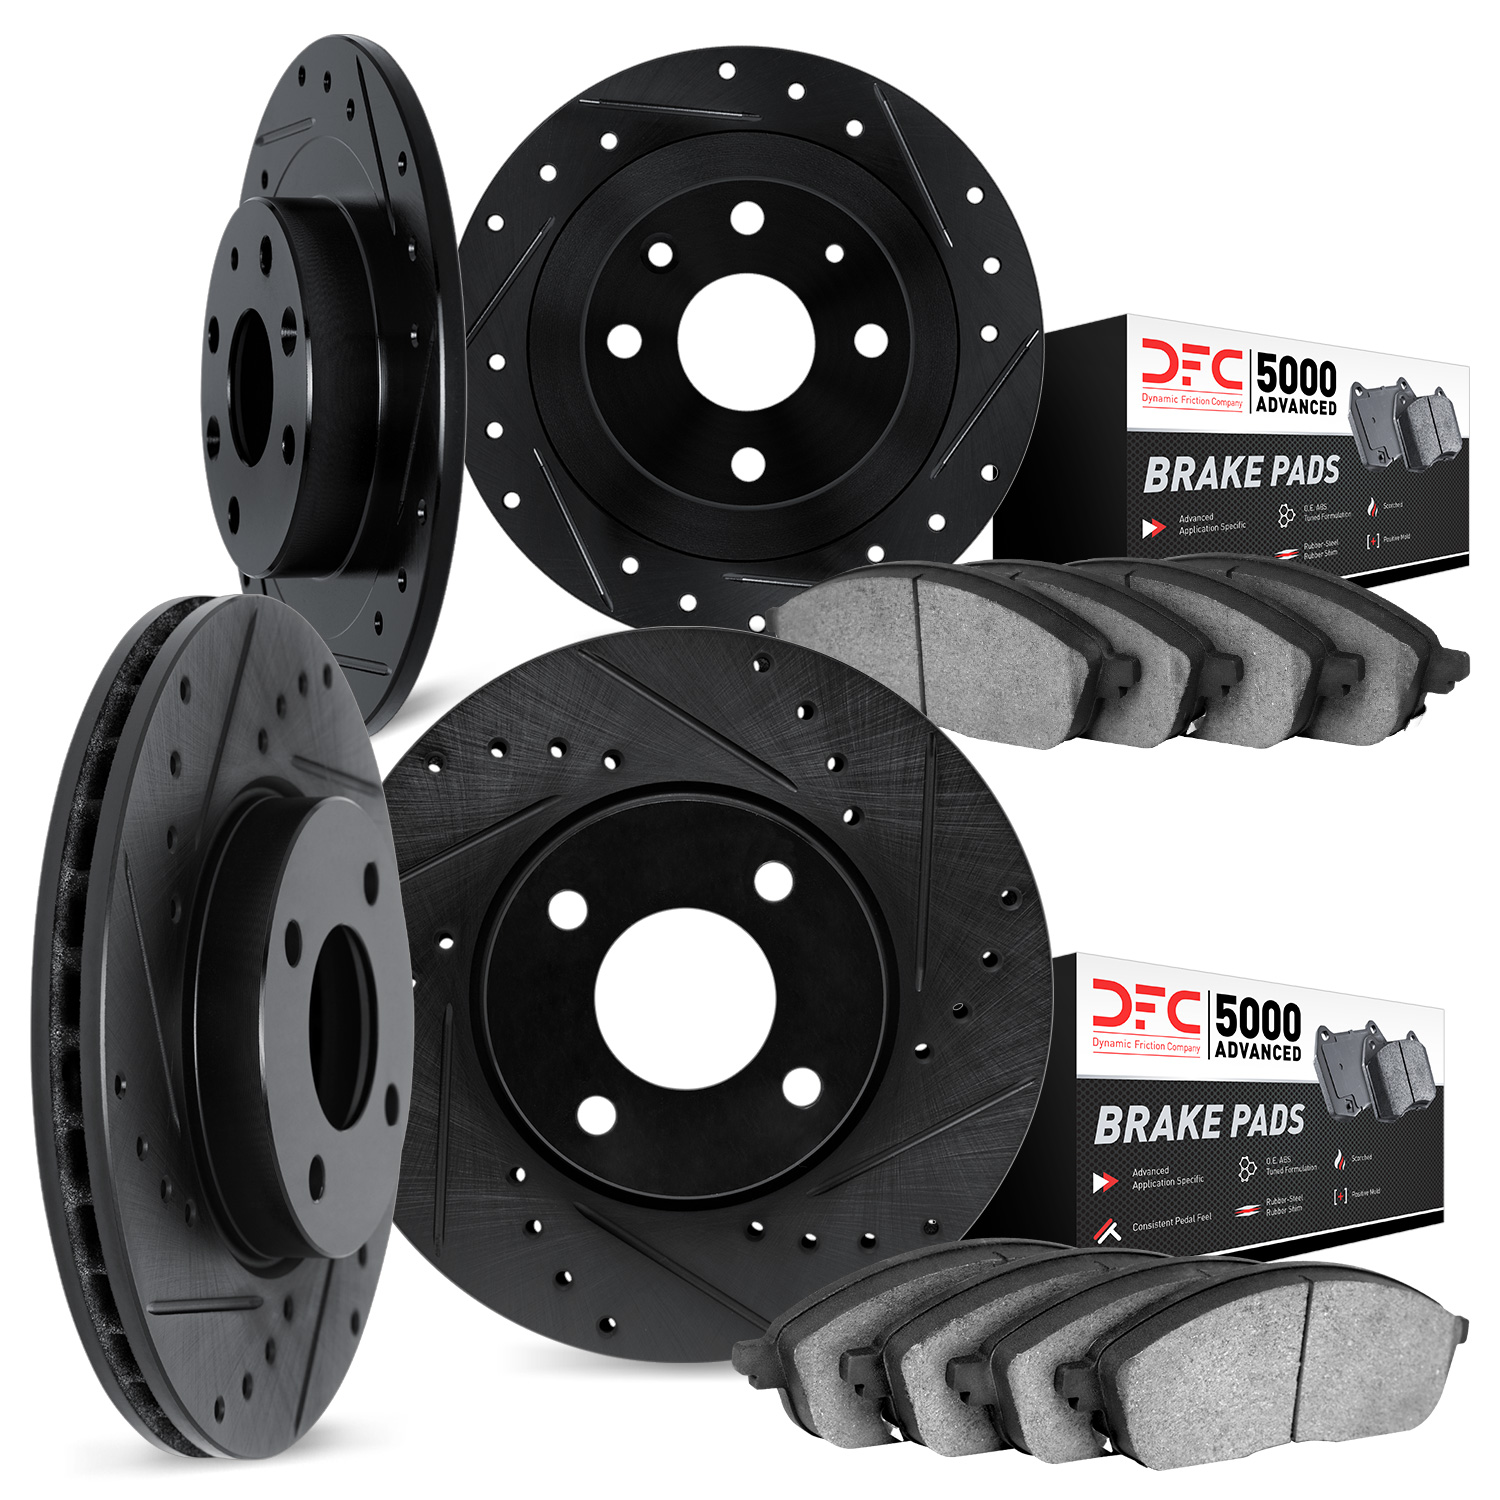 8504-67090 Drilled/Slotted Brake Rotors w/5000 Advanced Brake Pads Kit [Black], 1993-2001 Infiniti/Nissan, Position: Front and R